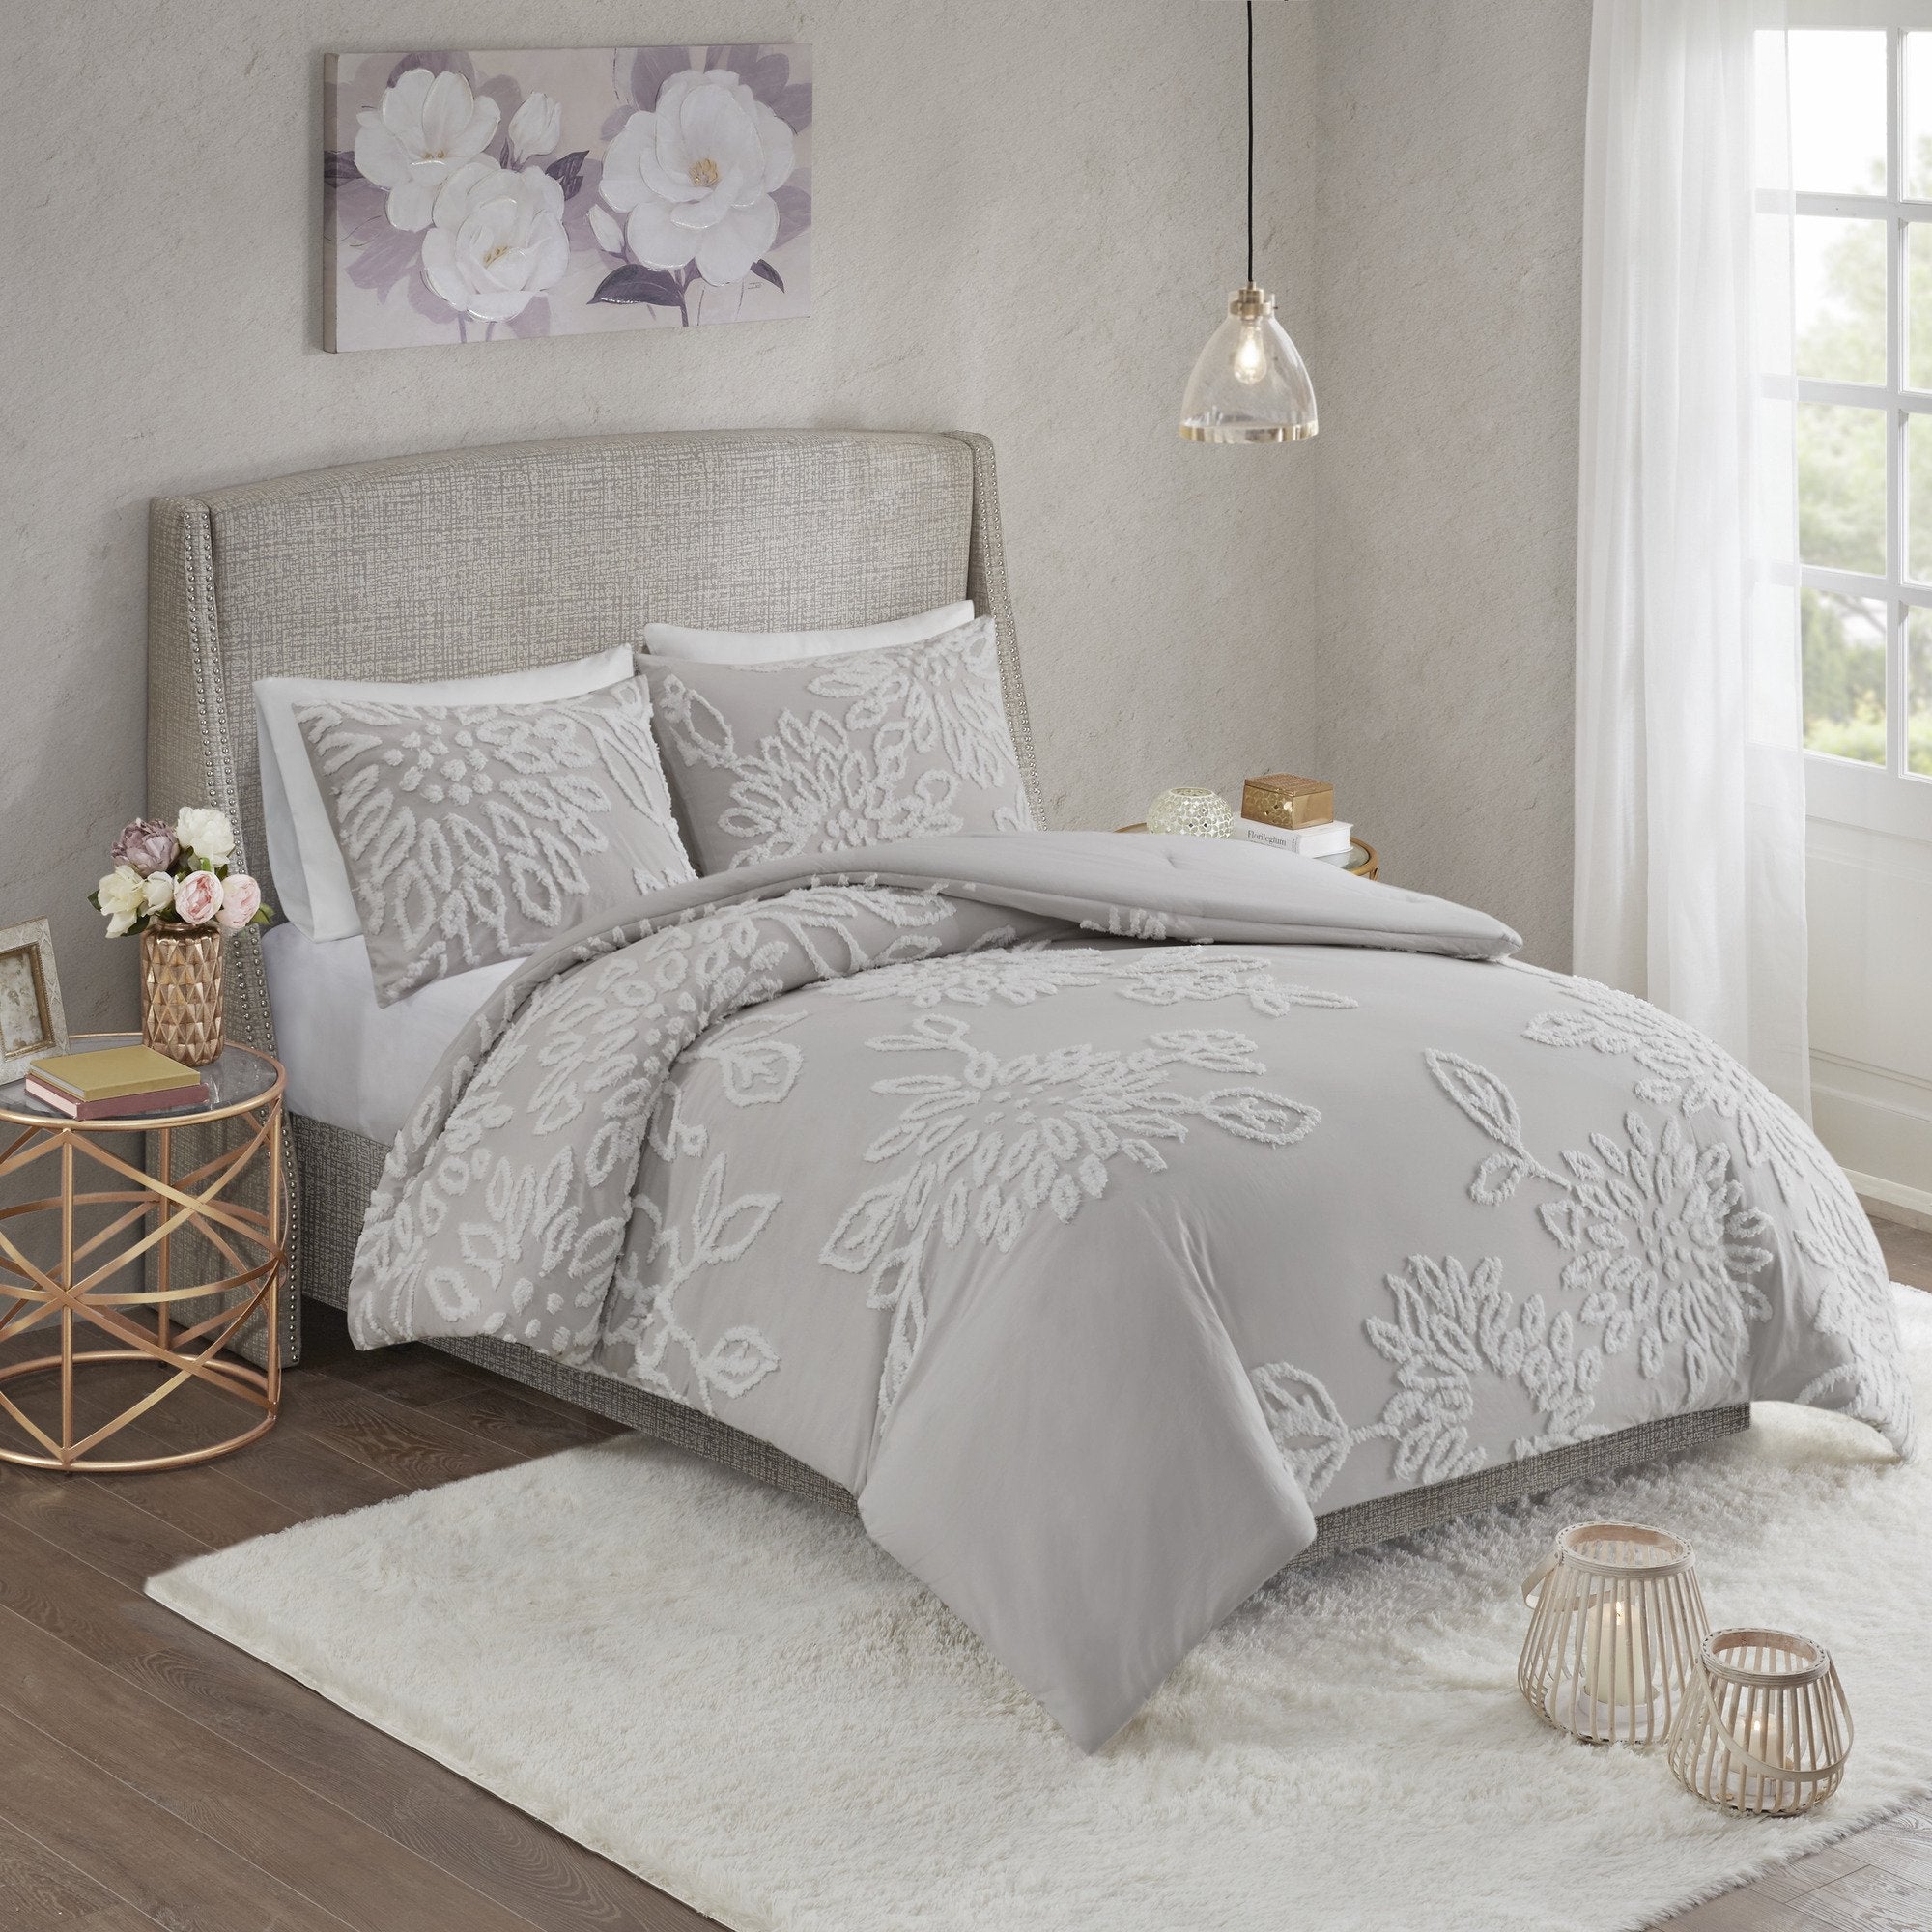 Full size white and grey comforter and sheets set. - Bedding